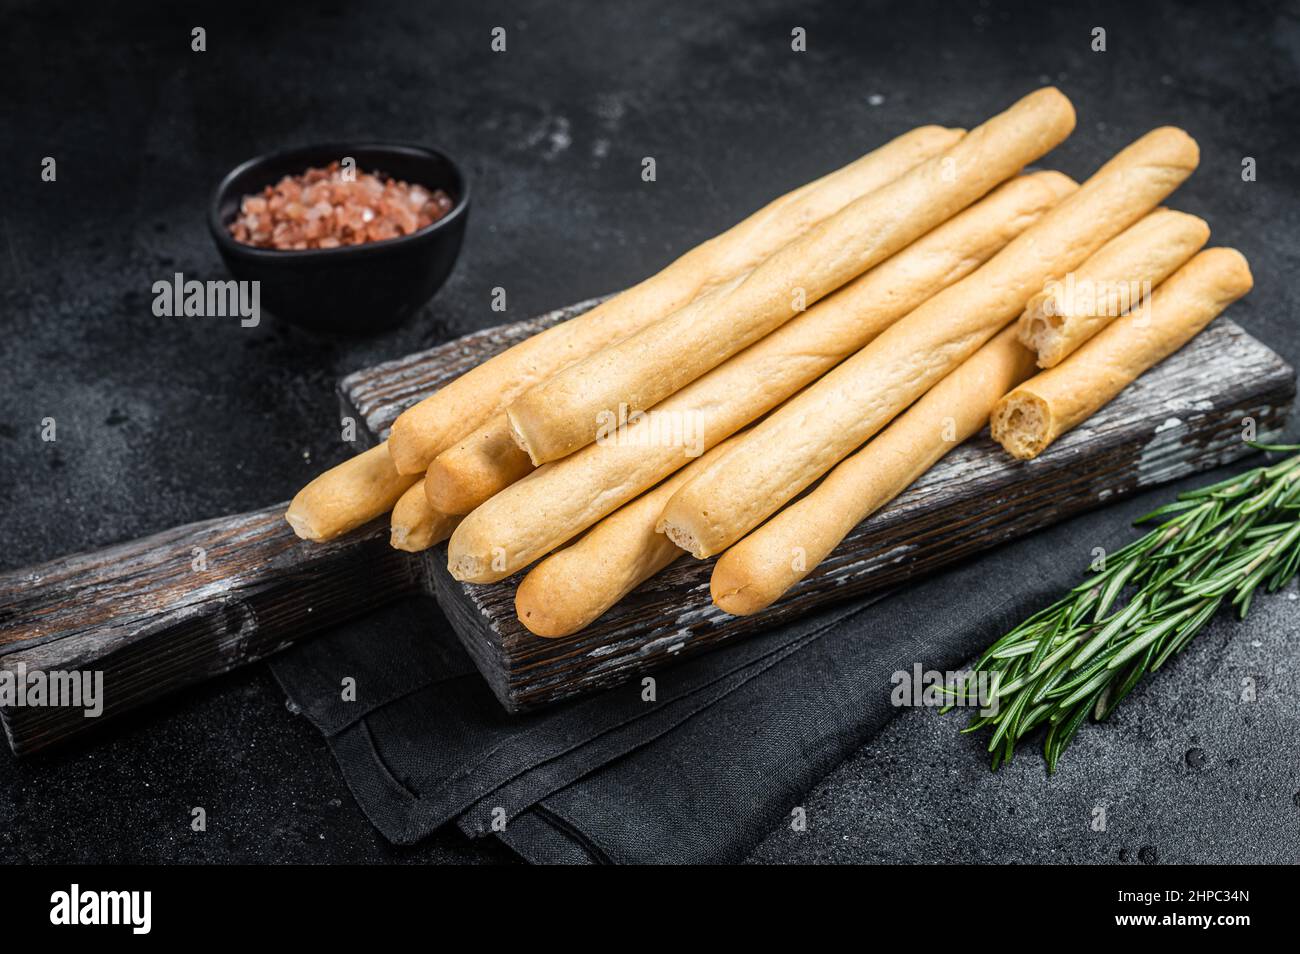 Italian grissini or salted bread sticks on wooden board. Black bakground. Top view Stock Photo